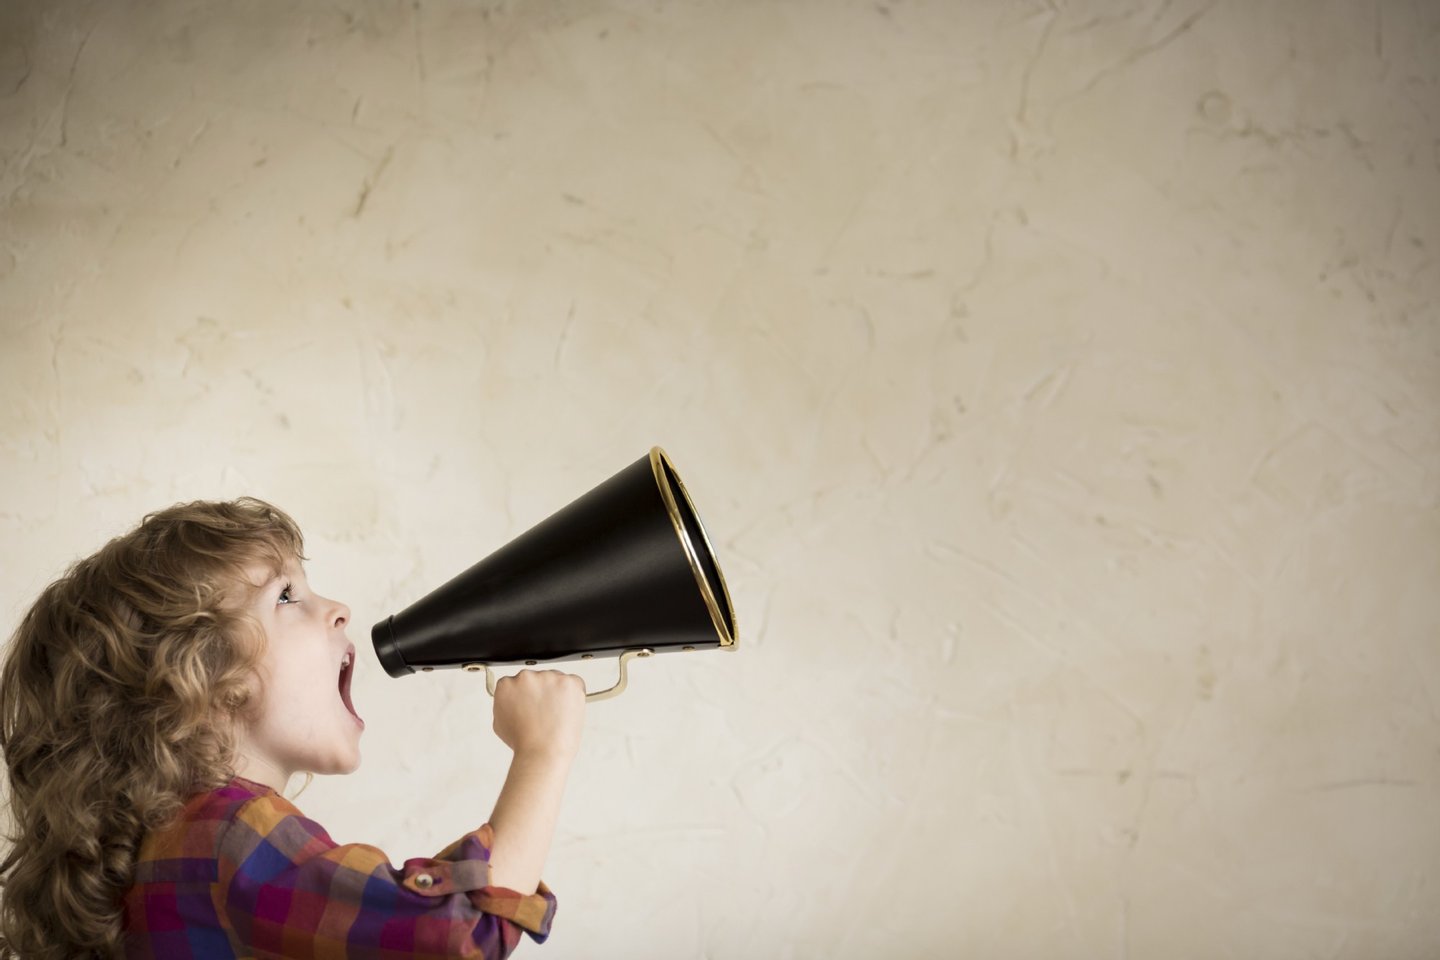 shout, shouting, business, concept, boss, hand, baby, boy, trumpet, success, talking, active, old, people, black, megaphone, idea, creative, speaker, speaking, retro, girl, holding, person, screaming, kid, vintage, grunge, winner, leader, child, advertising, copy space, message, agent, news, announcement, communication, unusual, studio, 